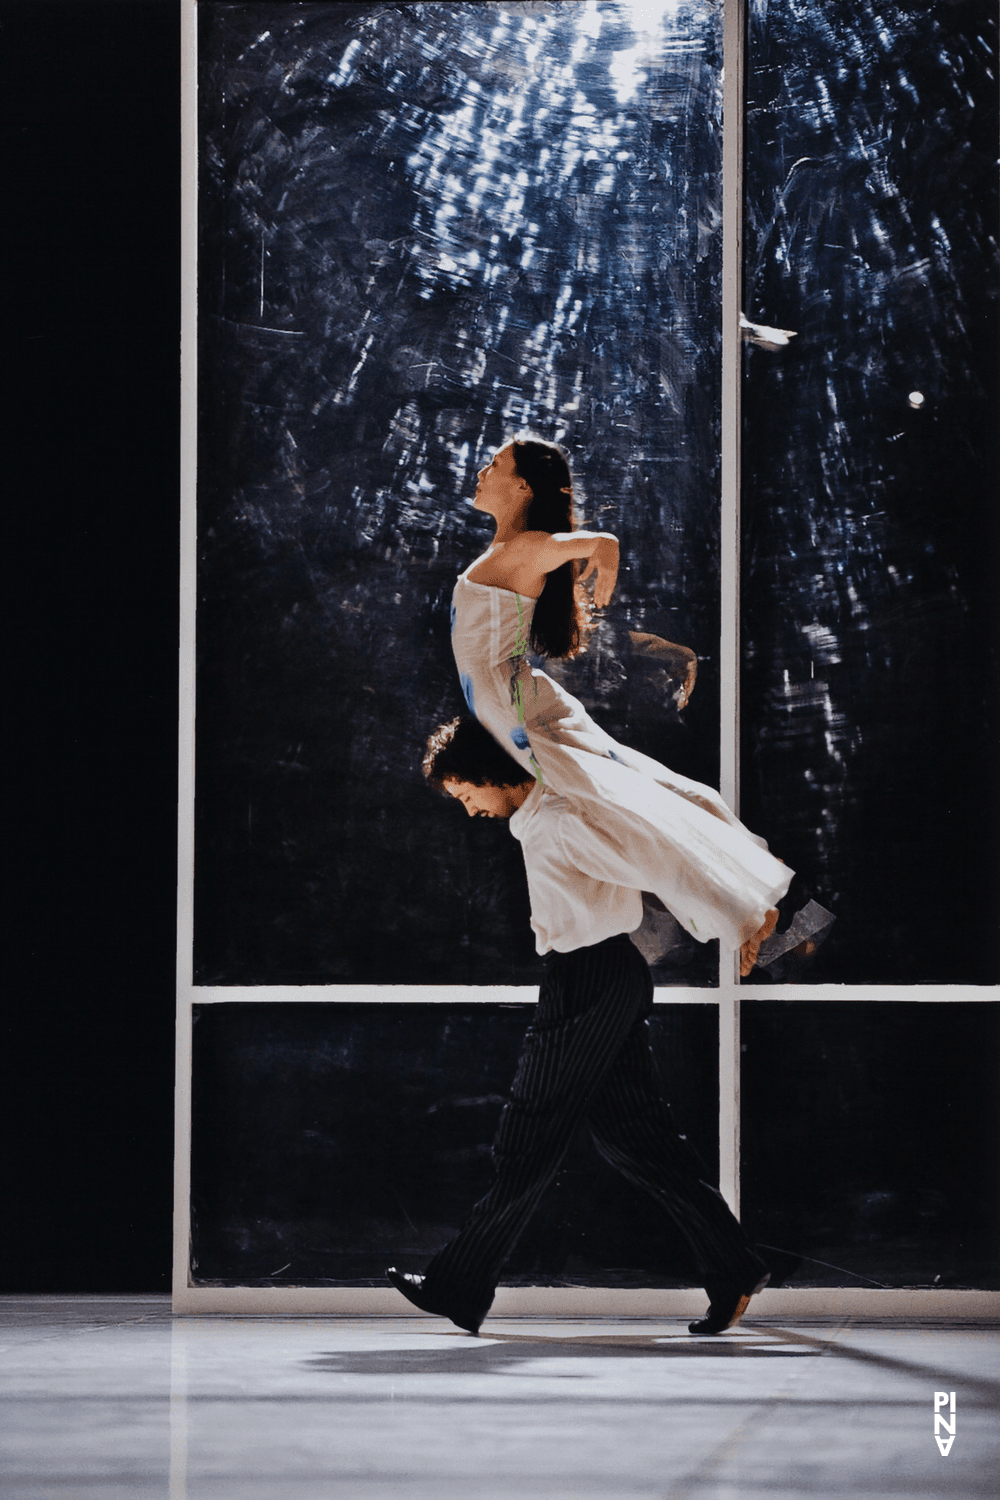 Jorge Puerta Armenta and Azusa Seyama in “For the Children of Yesterday, Today and Tomorrow” by Pina Bausch